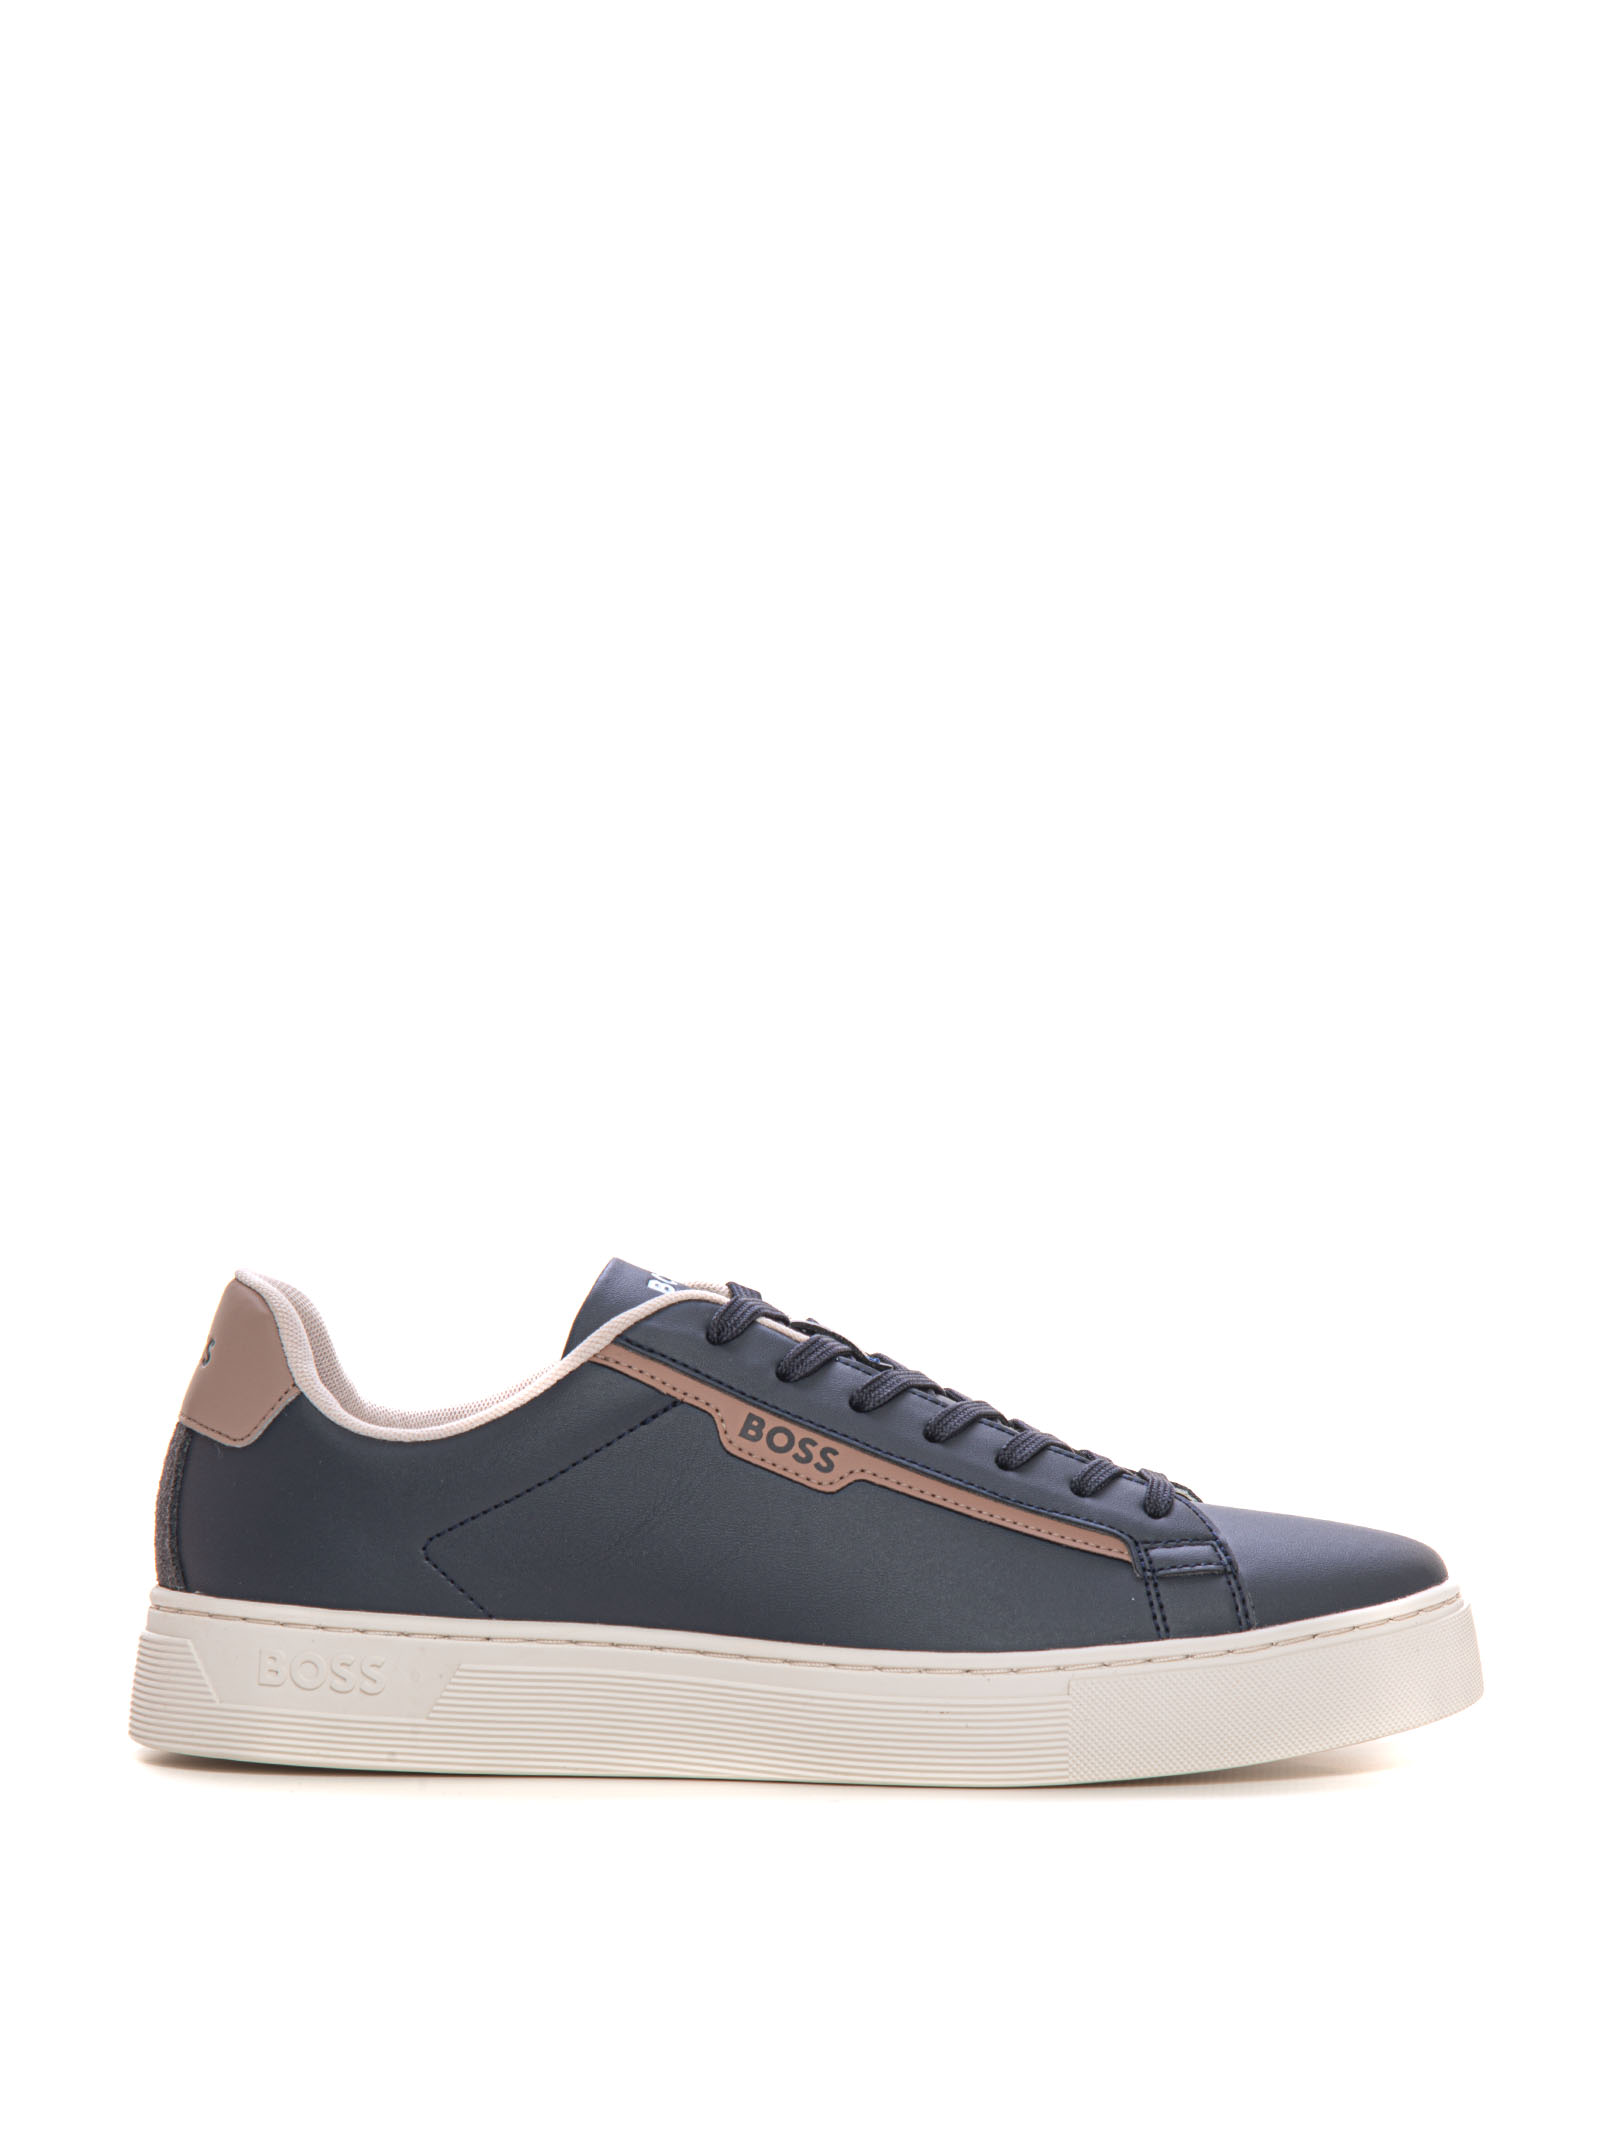 Hugo Boss Rhys-tenn-pusdth Leather Trainers With Laces In Blue